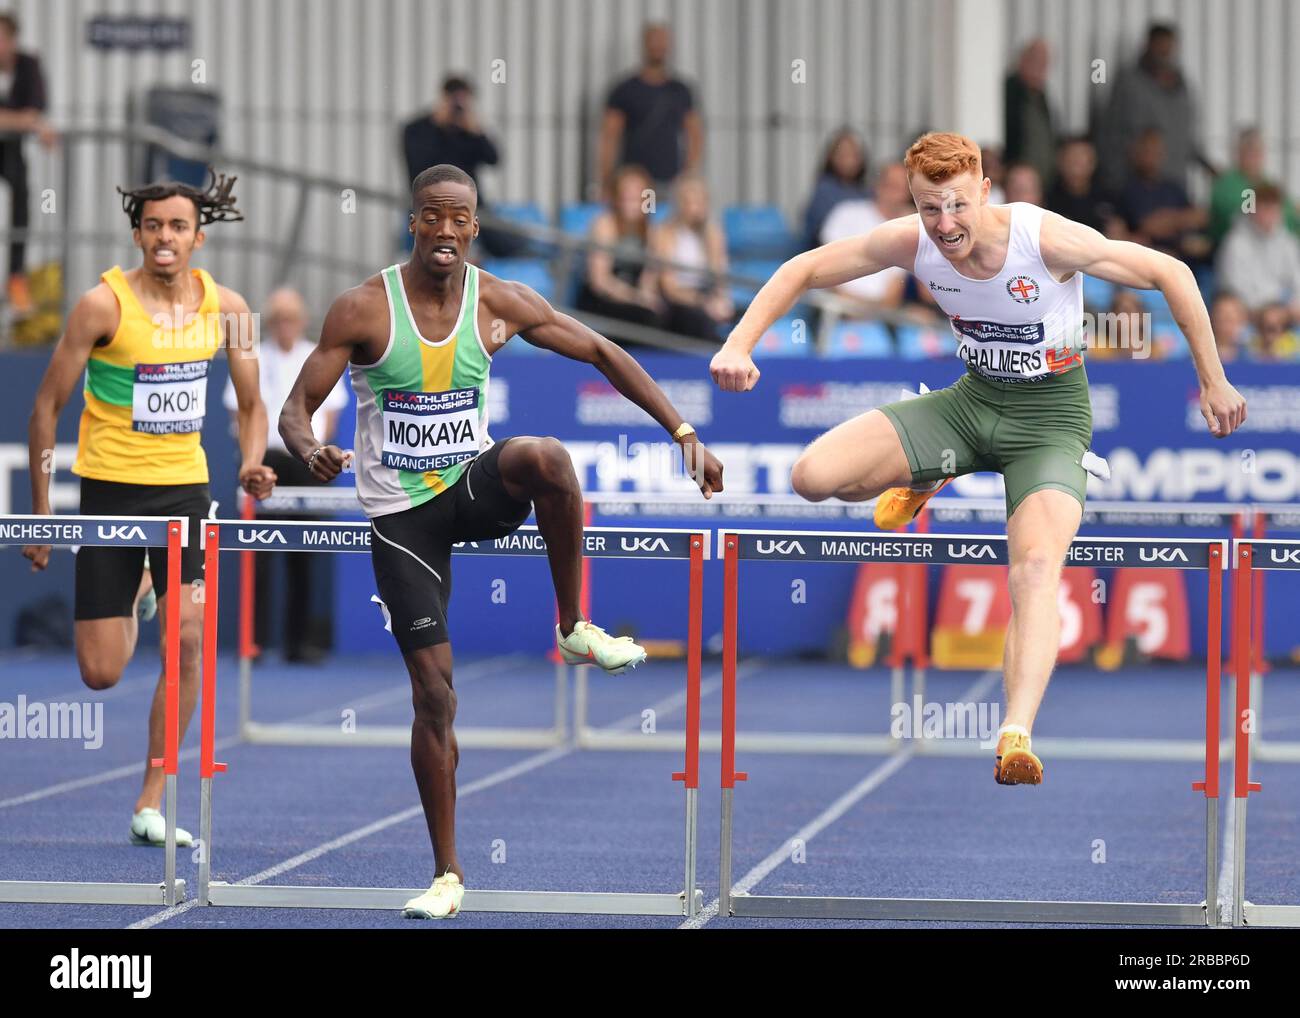 Manchester Regional Arena, Manchester, UK.  National UK Athletics Championships 2023.  Caption: CHALMERS and MOKAYA in the Mens Hurdles.  Picture: Mark Dunn/Alamy Live News (Sport) Stock Photo